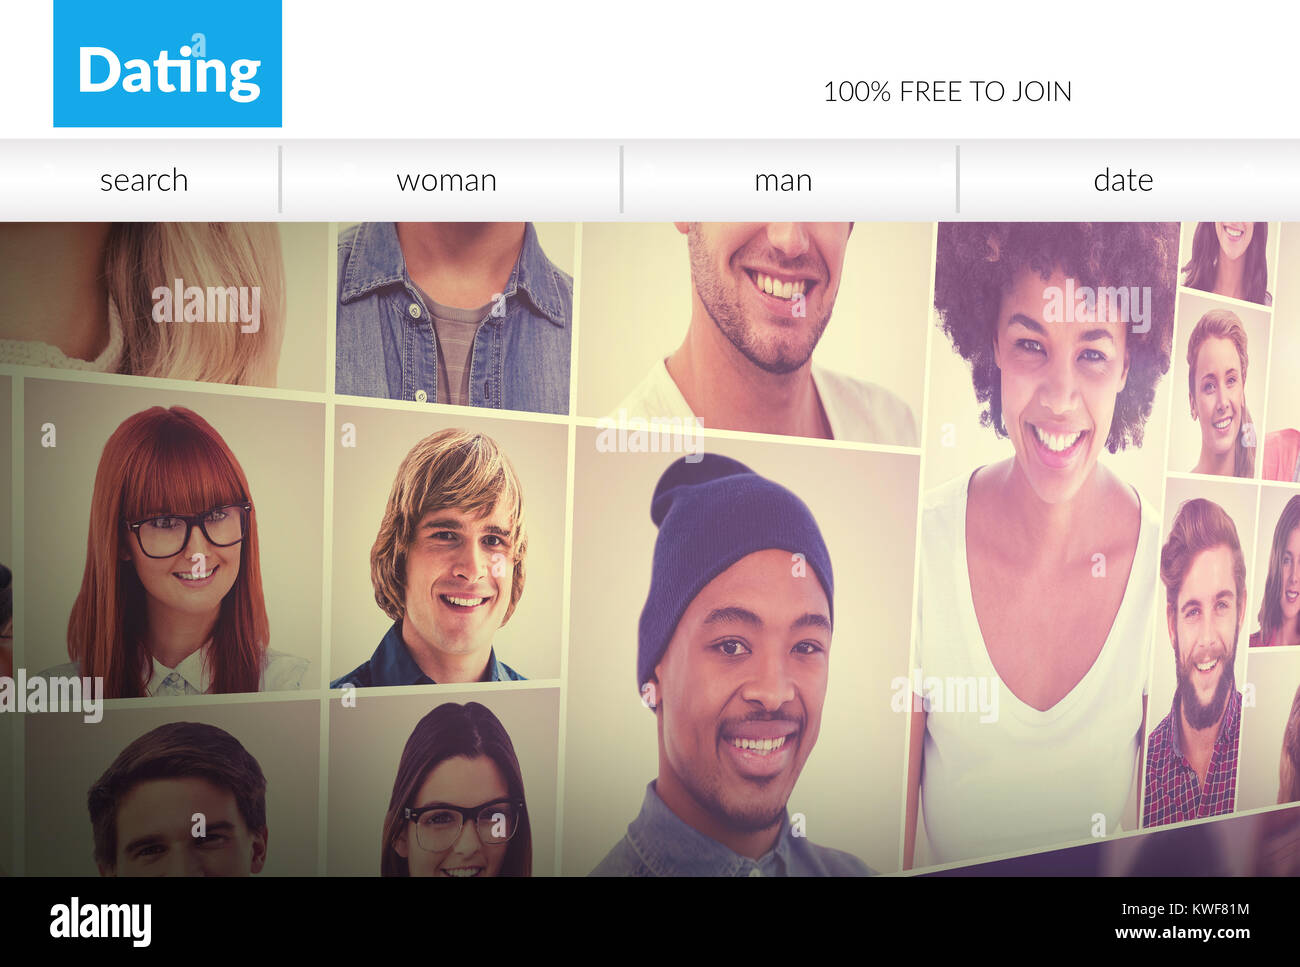 Head shots of people on dating site wallpaper Stock Photo